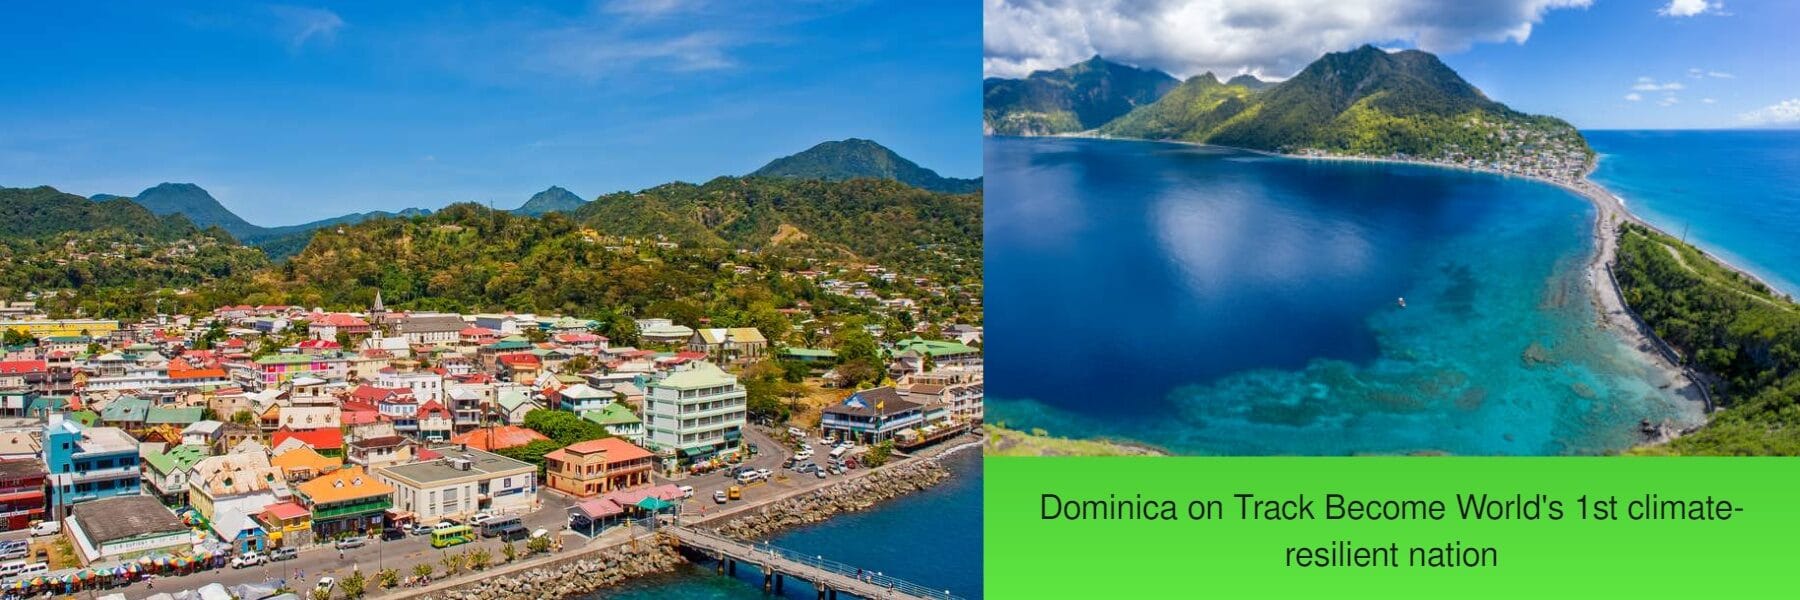 Dominica on Track Become World's 1st climate-resilient nation